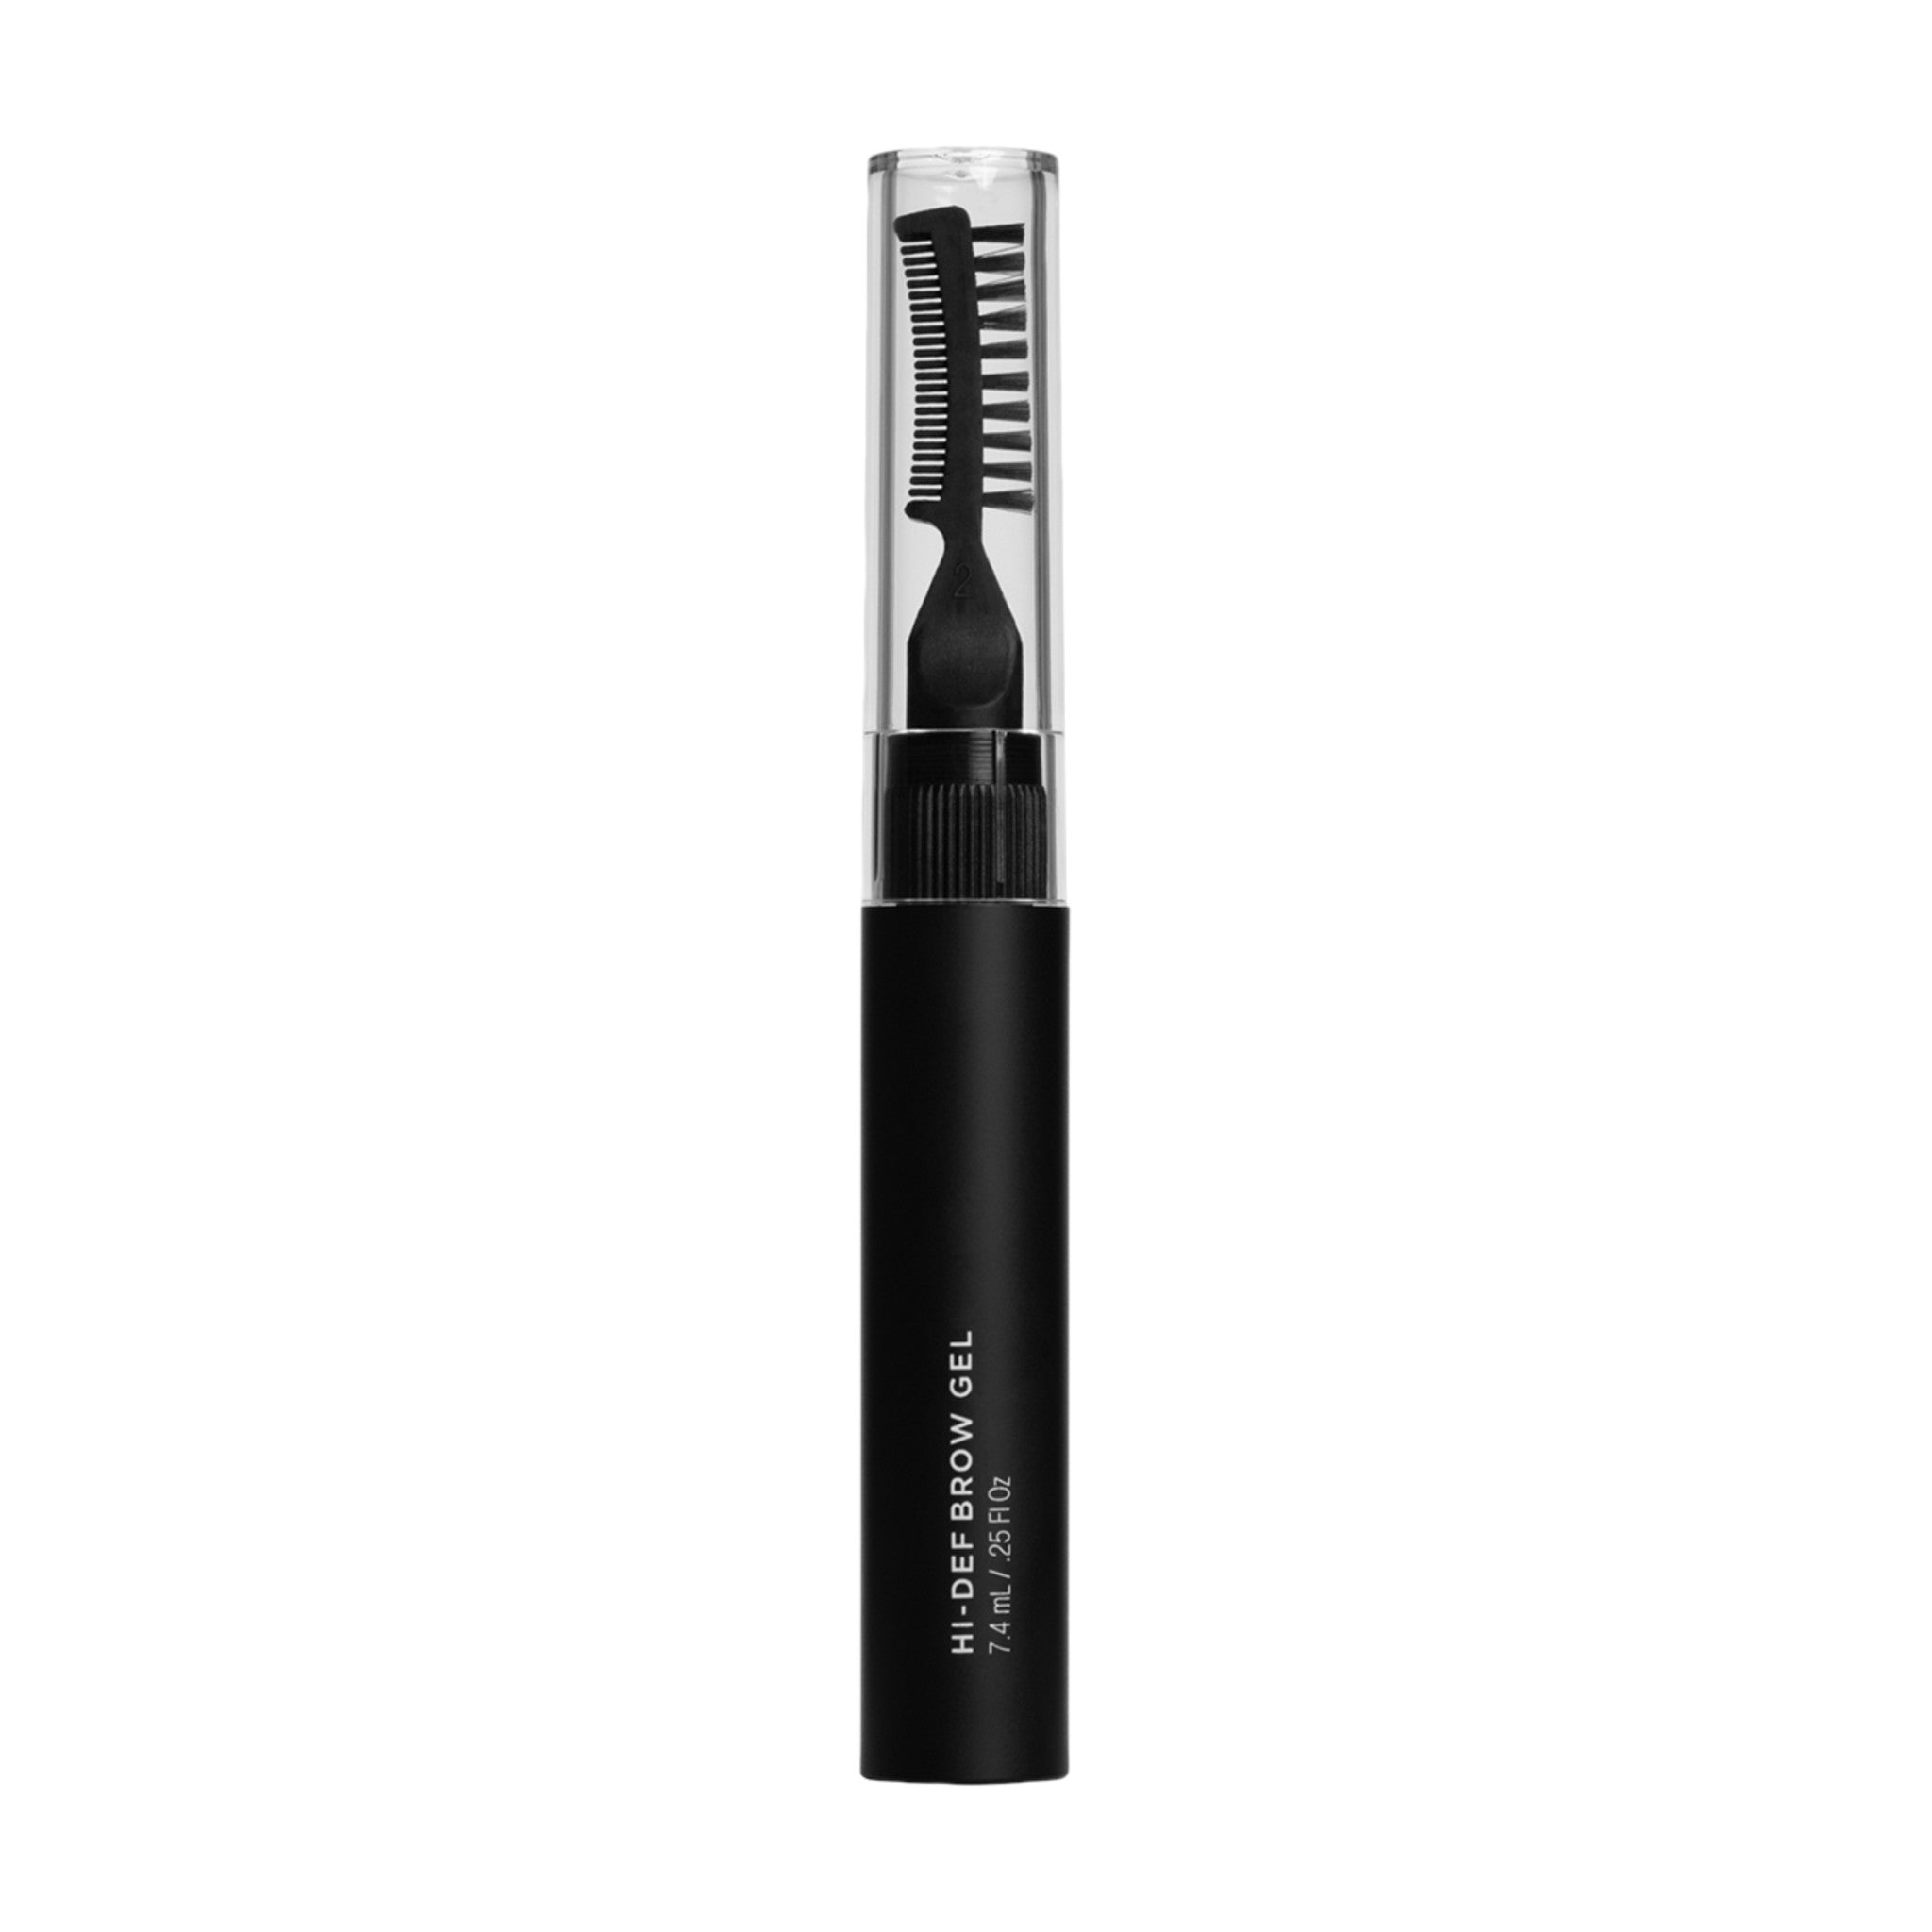 RevitaLash Hi Def Brow Gel Color/Shade variant: Dark Brown main image. This product is in the color brown